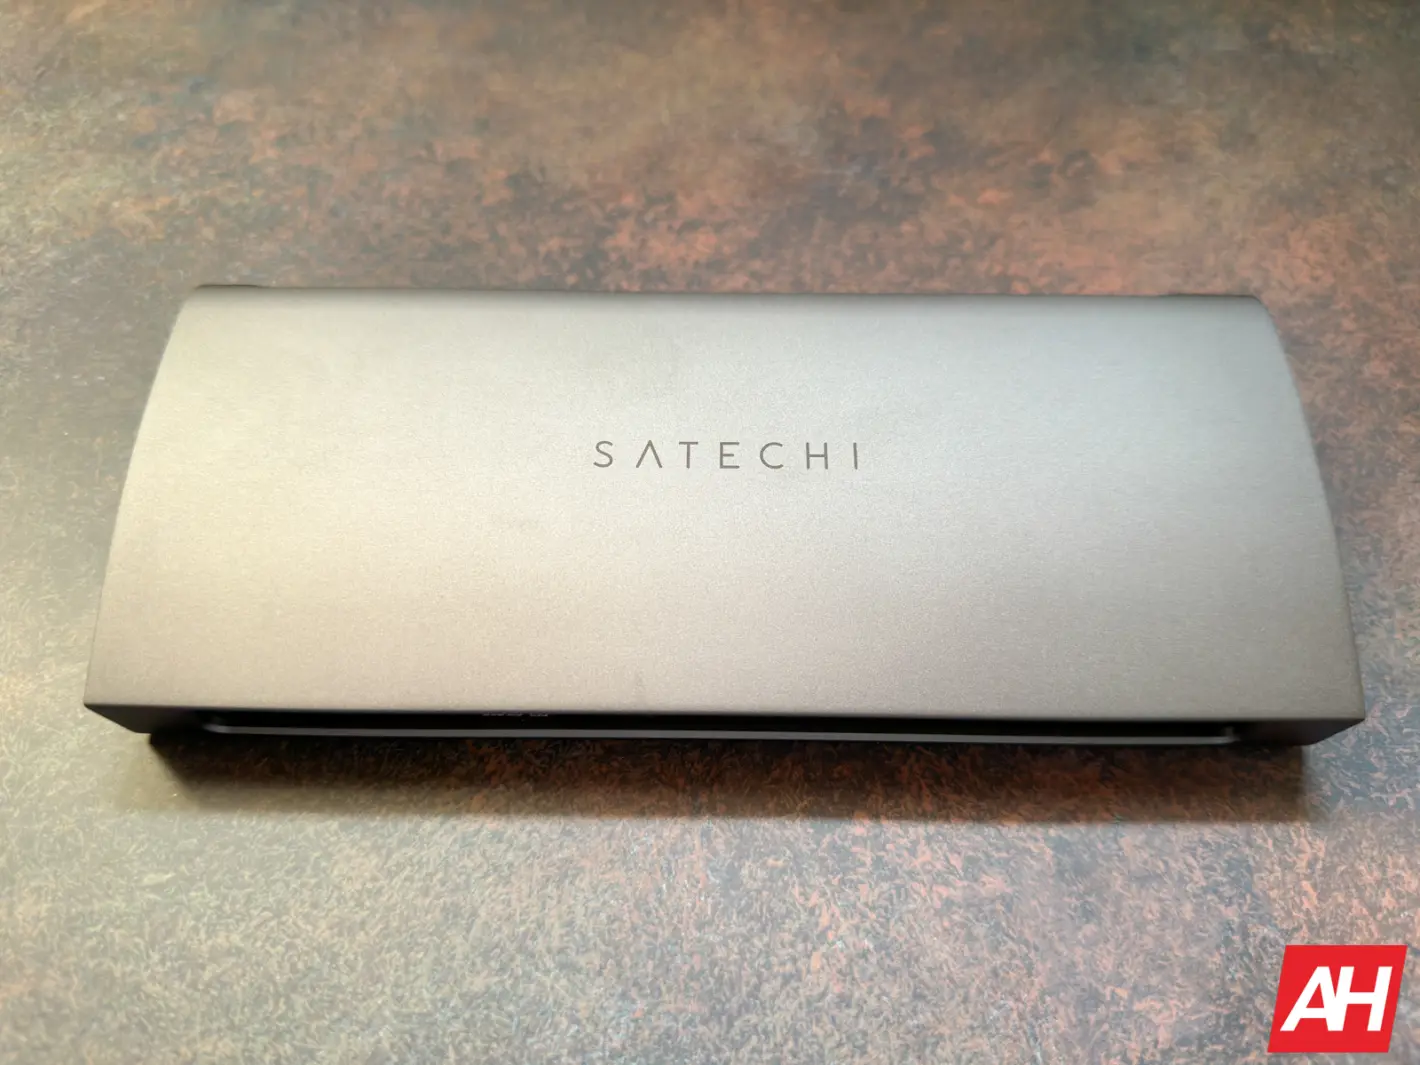 Featured image for Satechi Thunderbolt 4 Dock Review: Almost everything you need